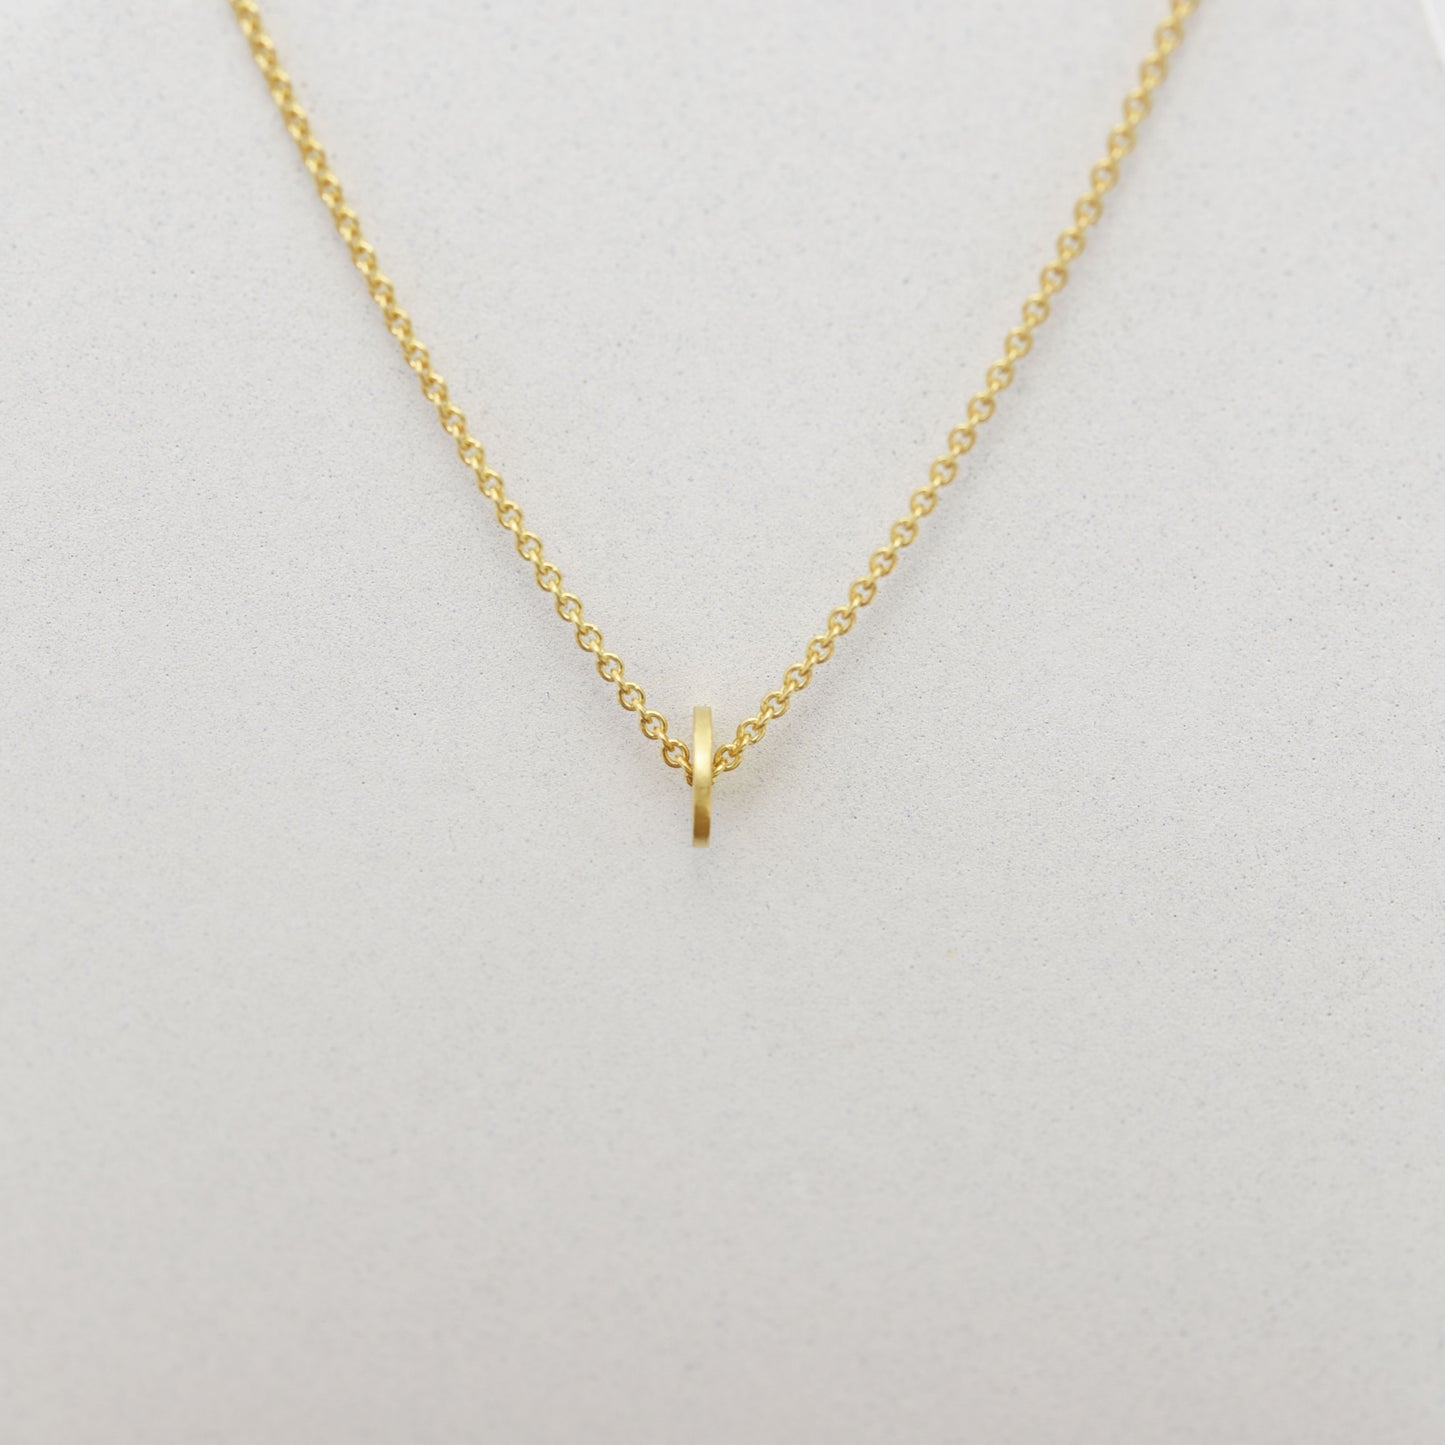 Dainty DOT necklace N°16 in gold plated silver or silver